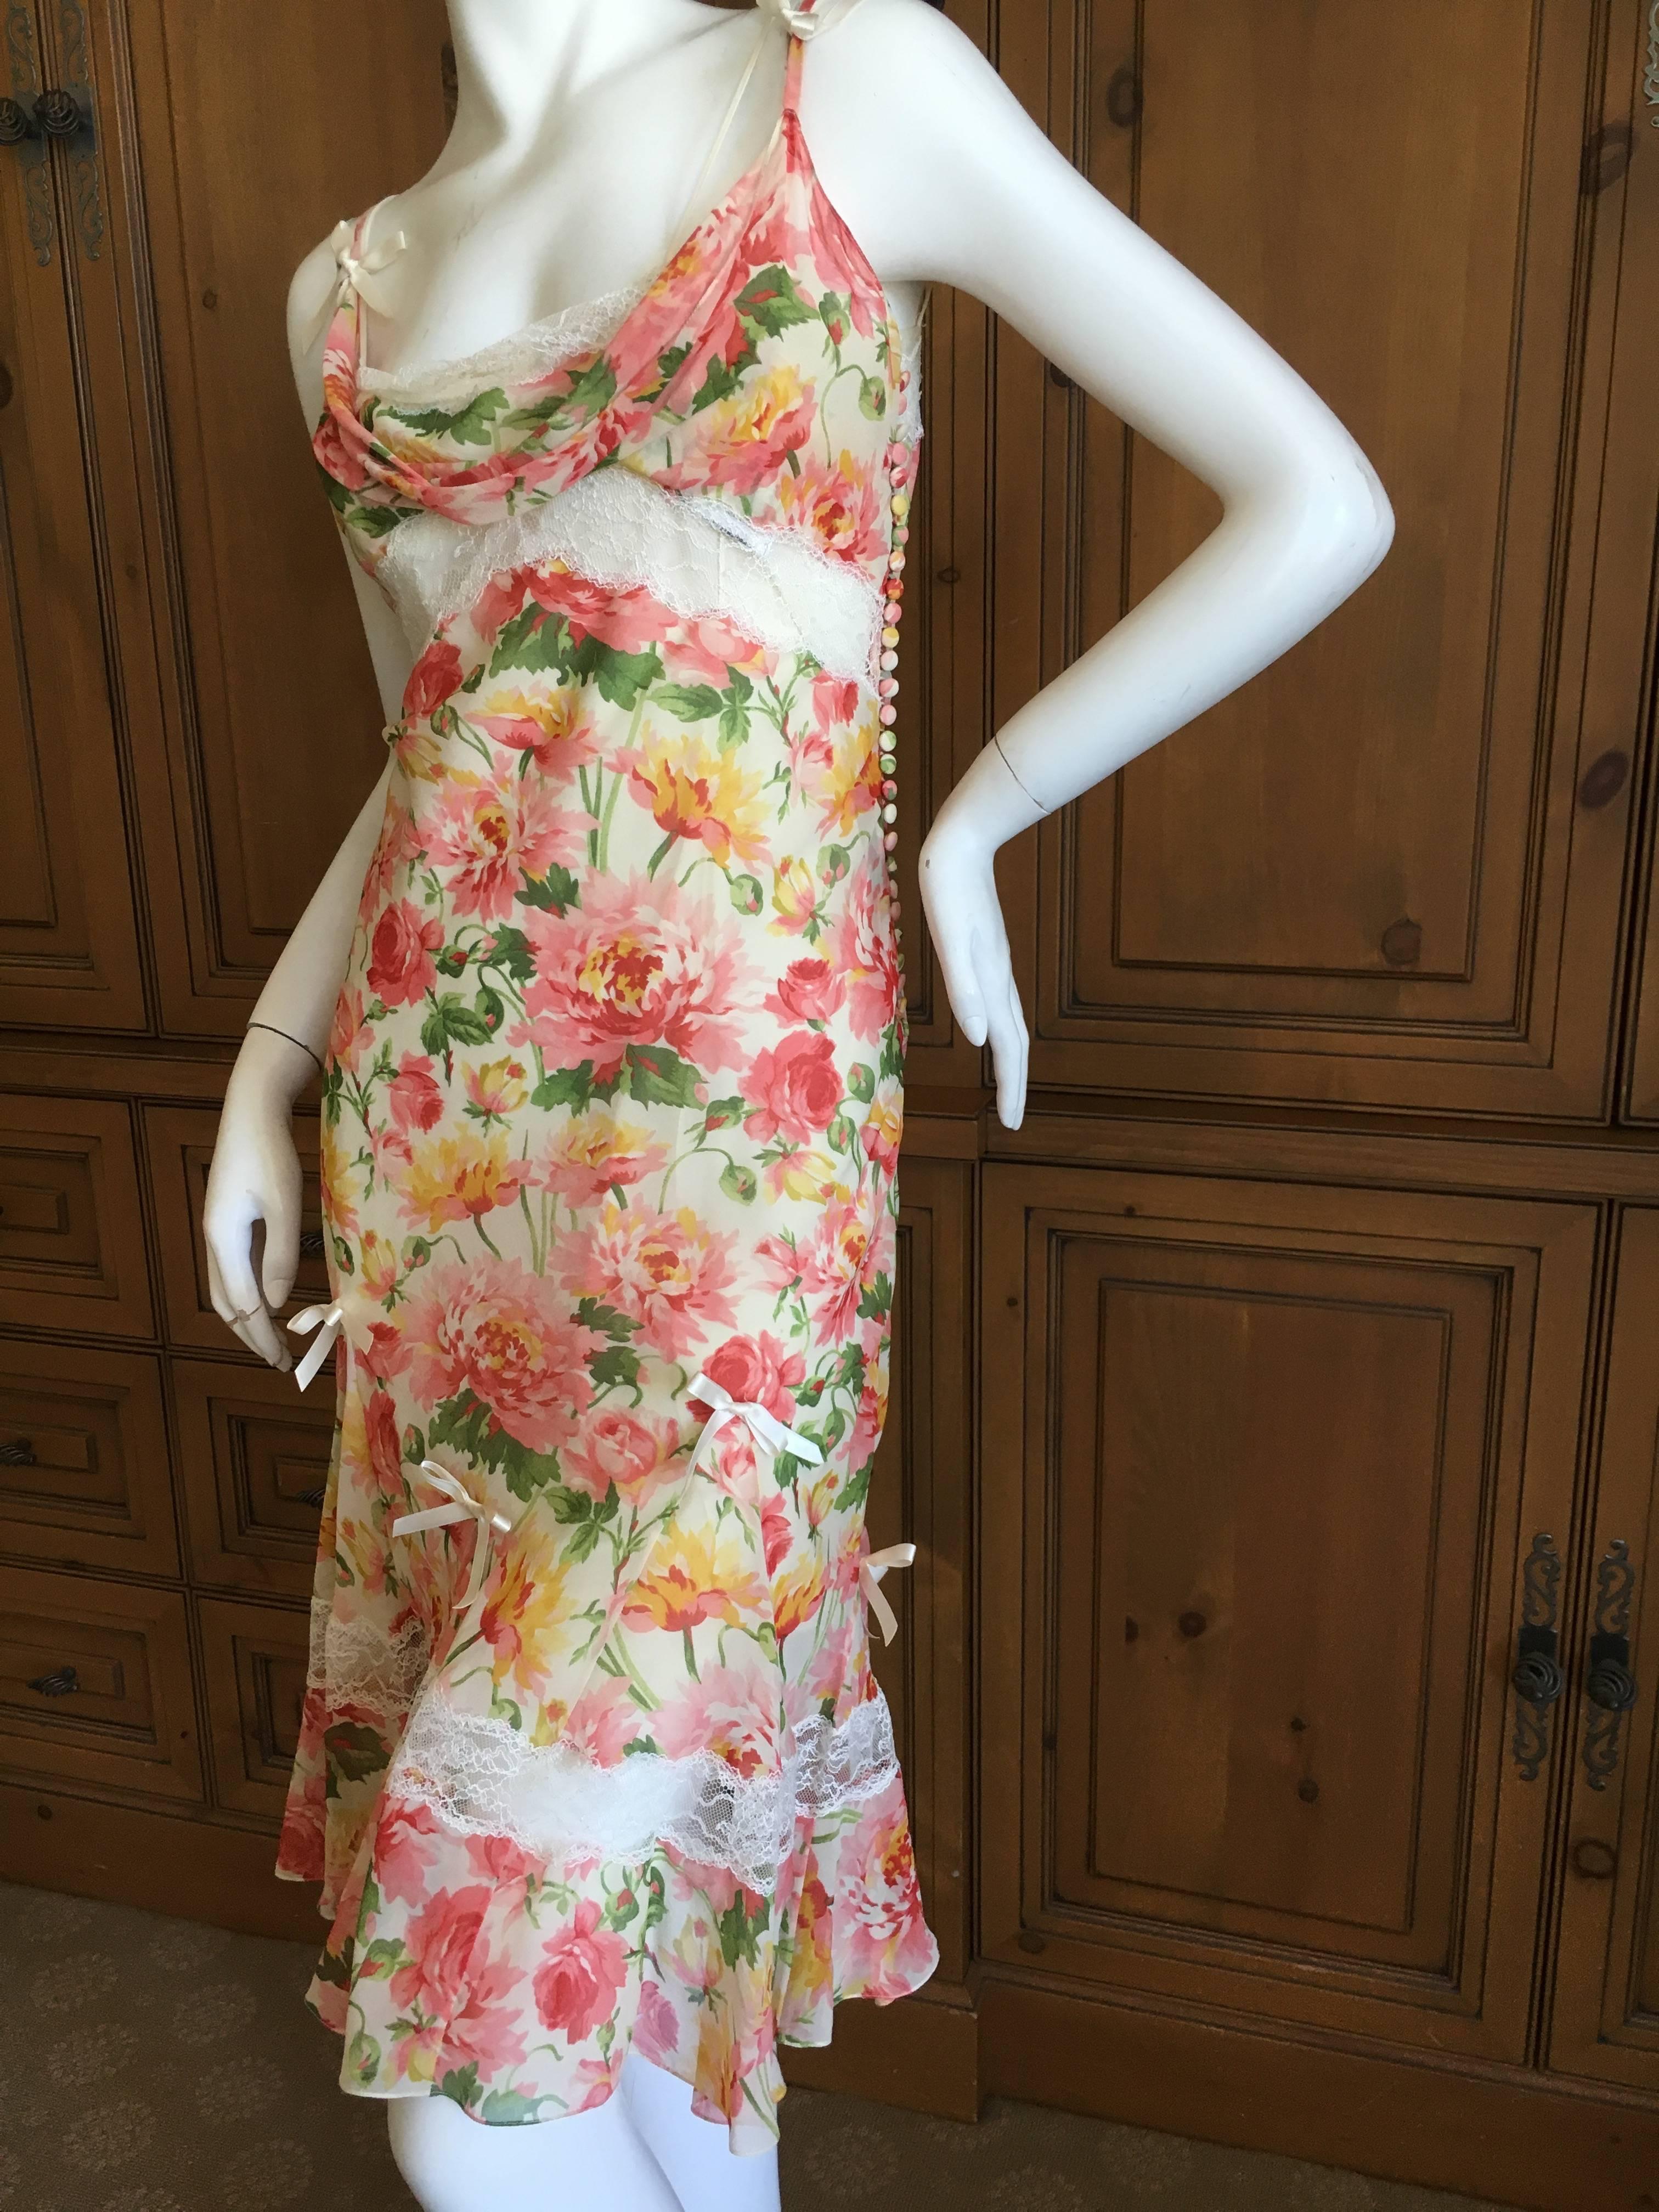 Christian Dior by John Galliano Romantic Floral Dress with Sheer Lace Inserts 38 In Excellent Condition For Sale In Cloverdale, CA